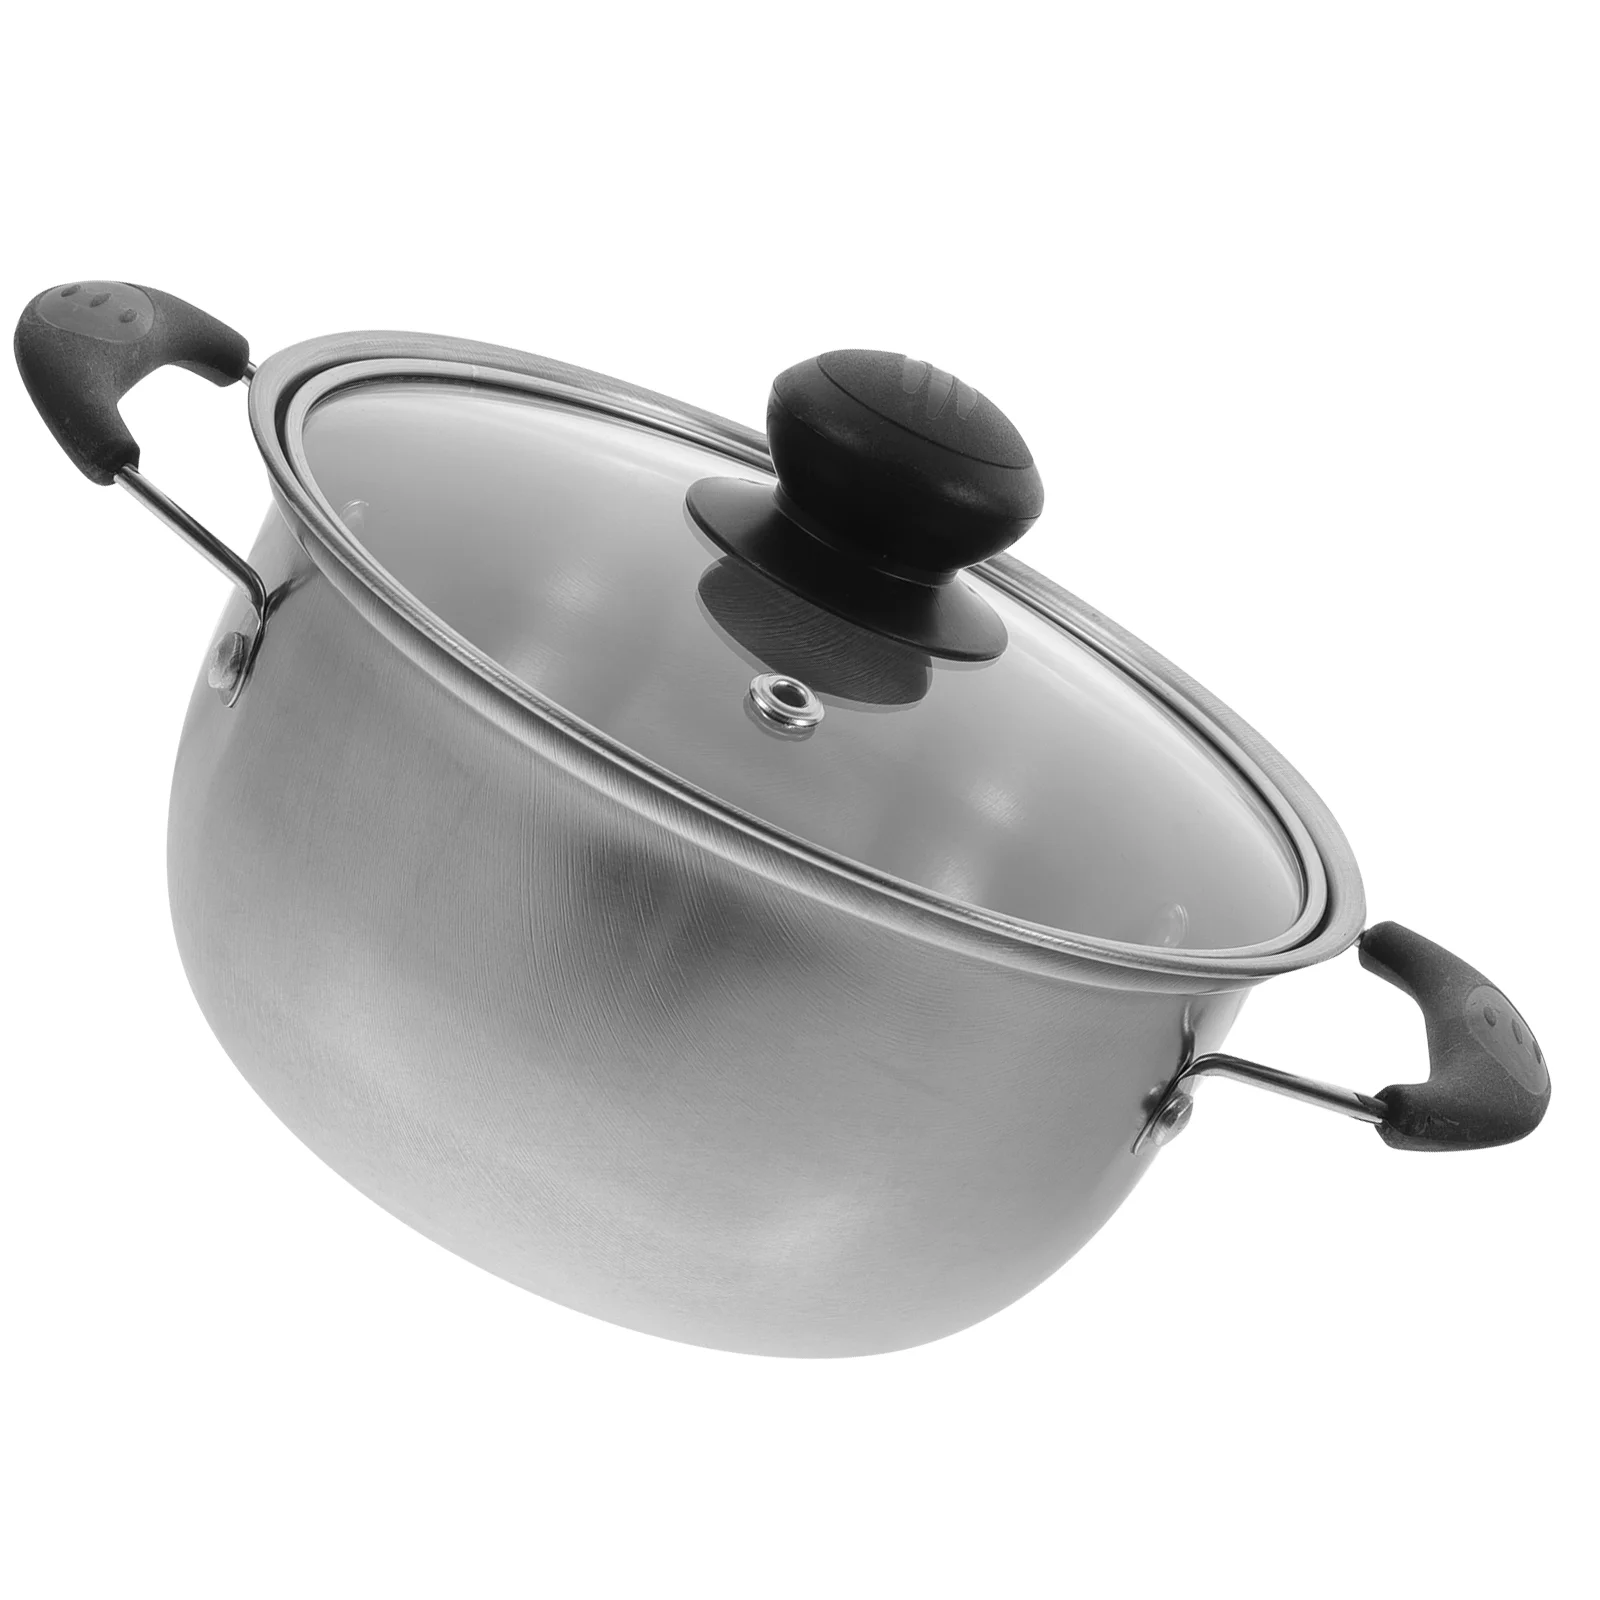 

Stainless Steel Milk Pot Soup Cookware Glass Stovetop Steam Cooking Frying Pan Set Lids Stockpot